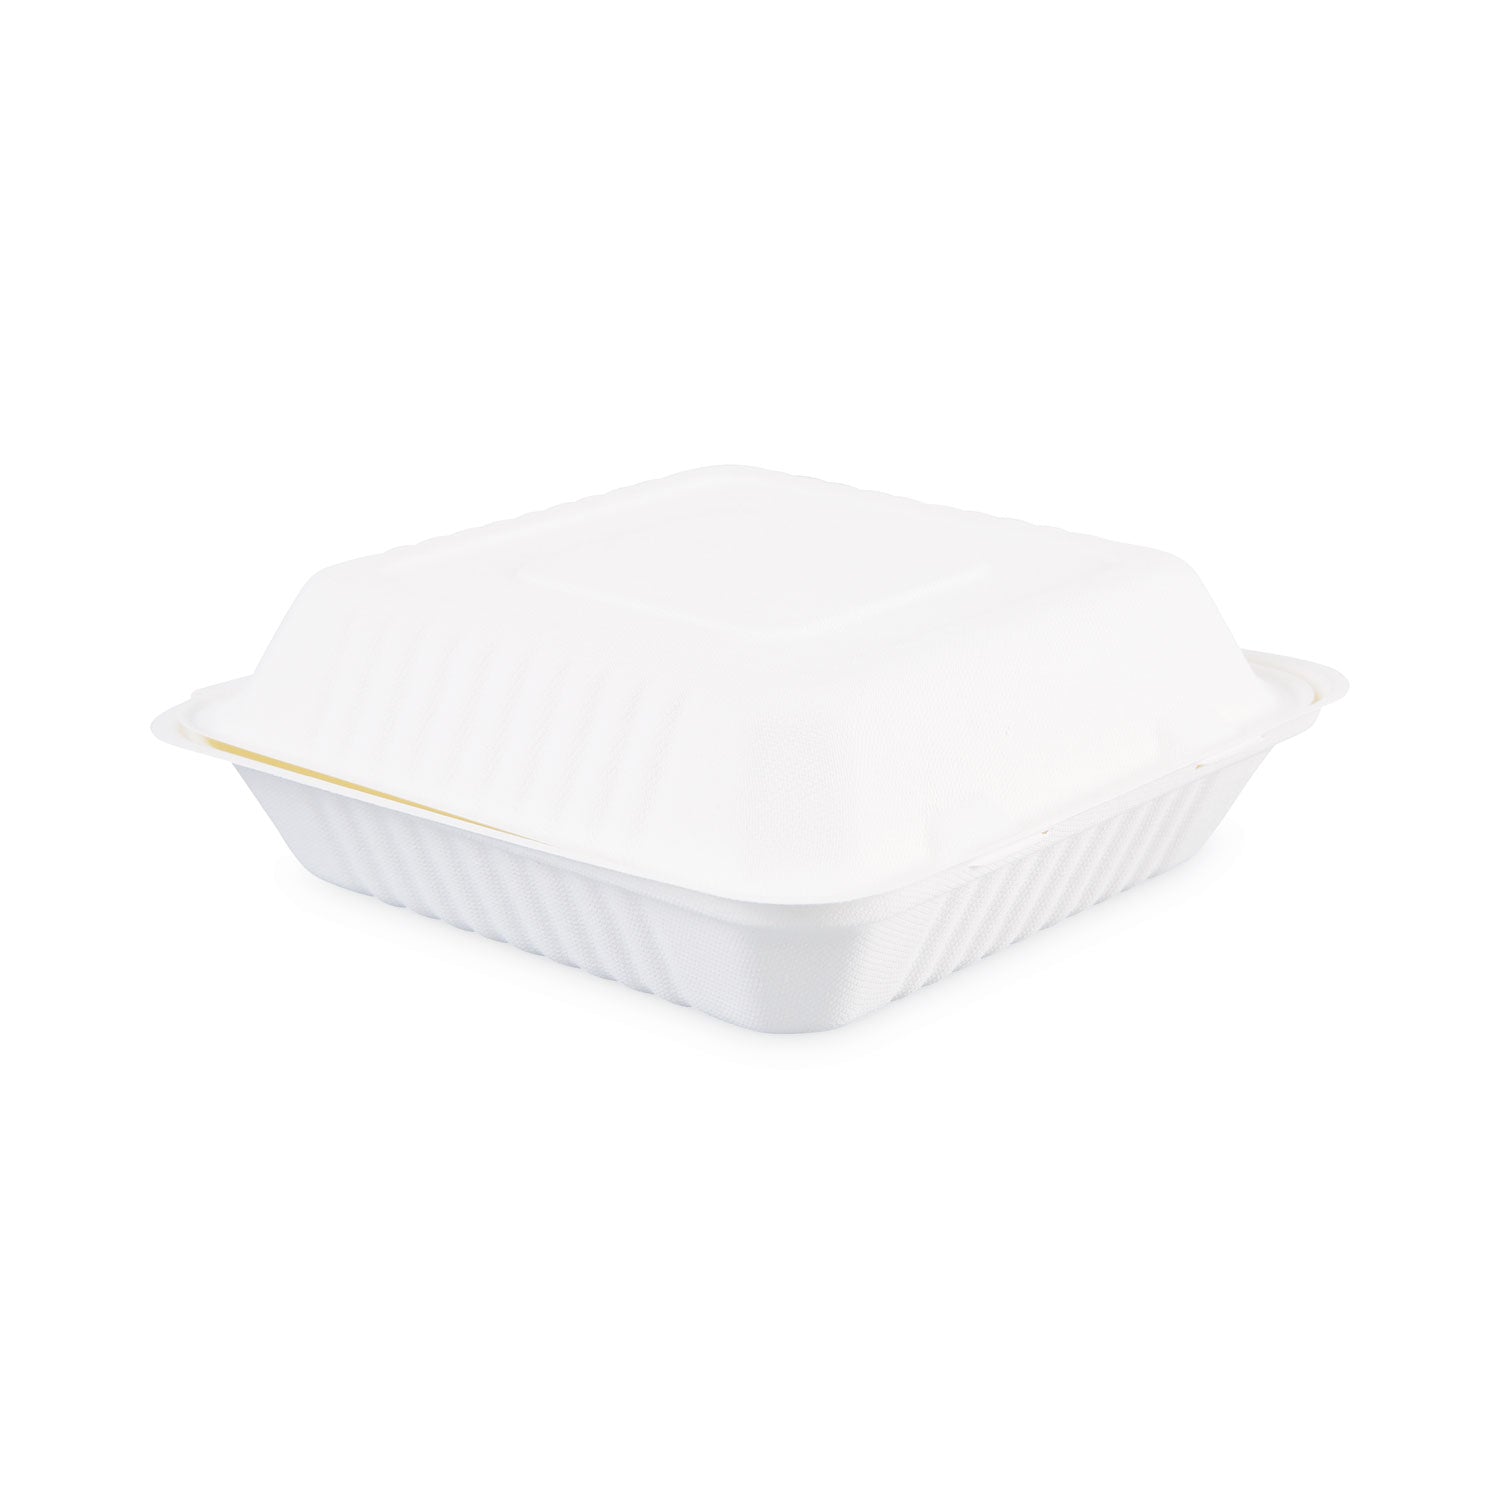 bagasse-food-containers-hinged-lid-1-compartment-9-x-9-x-319-white-sugarcane-100-sleeve-2-sleeves-carton_bwkhingewf1cm9 - 2